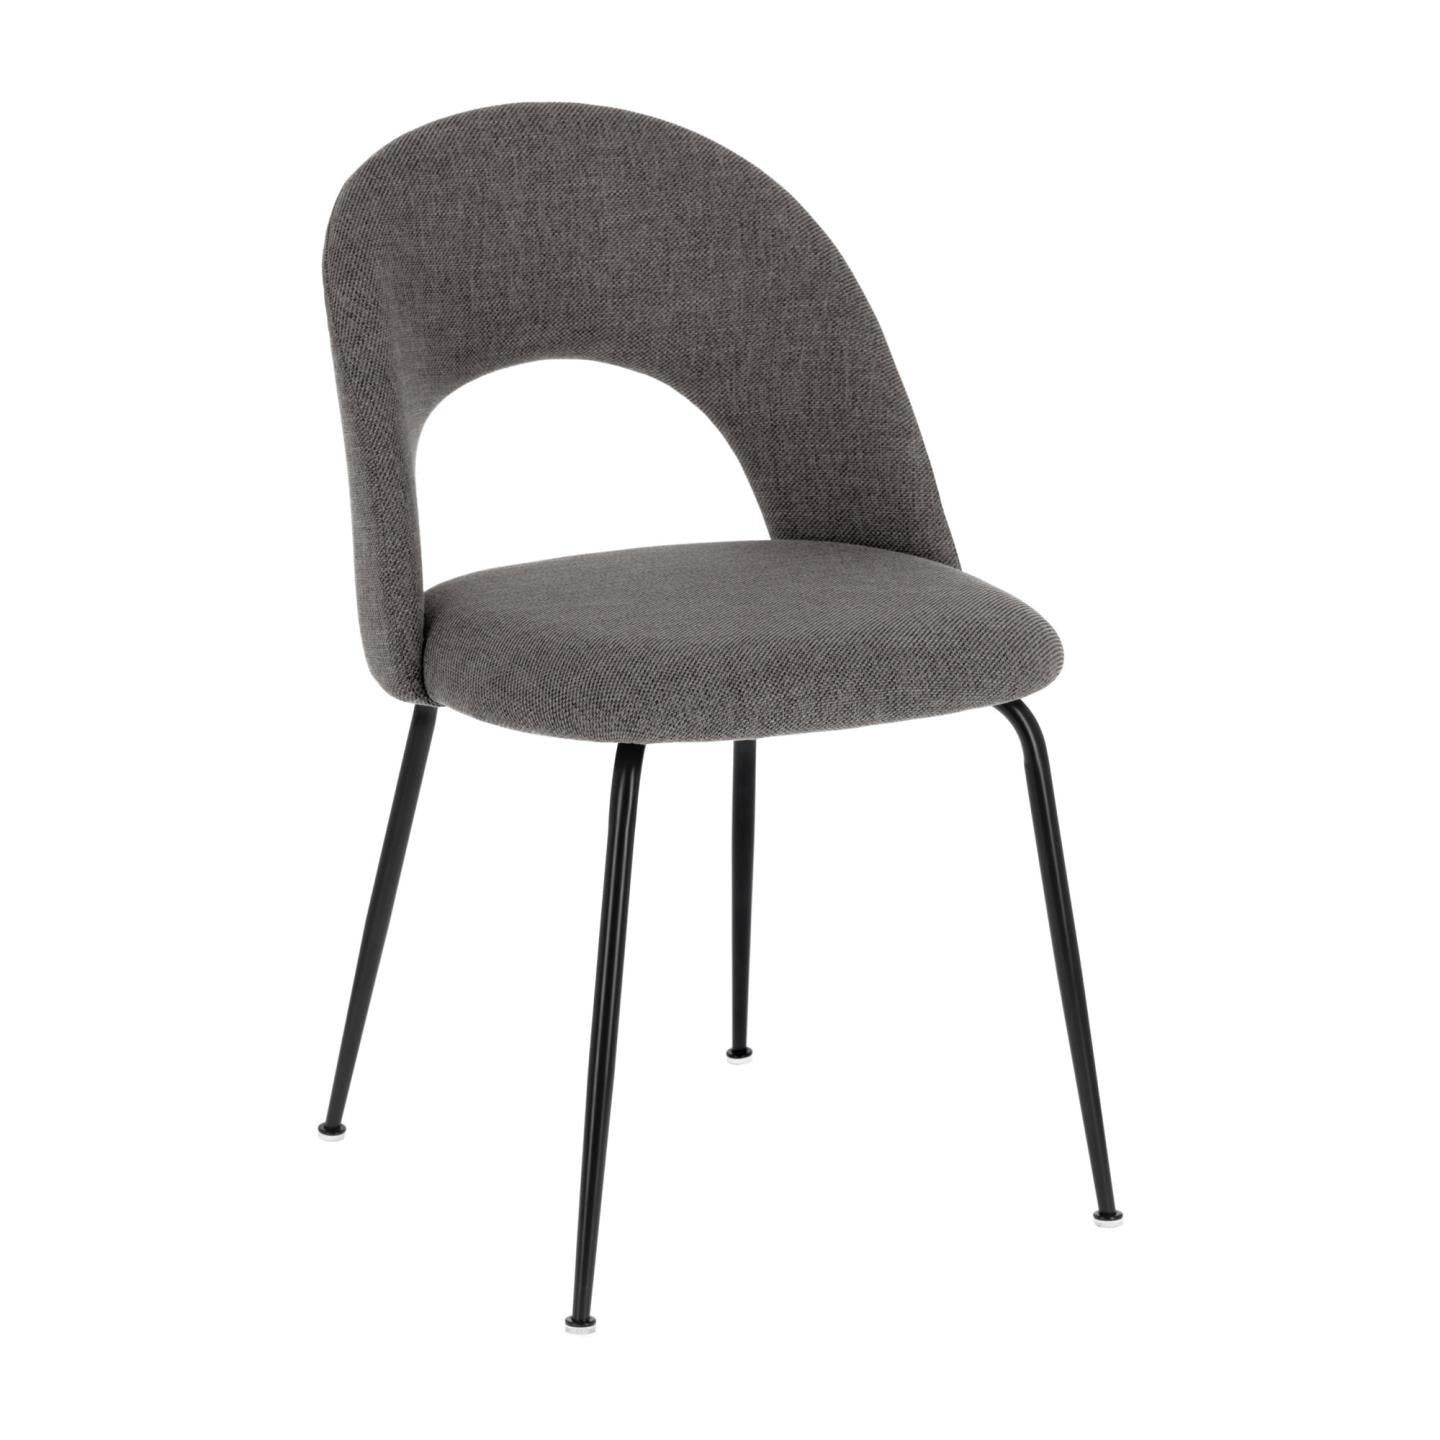 Mahalia dining chair in dark grey with steel legs, with a black painted finish.